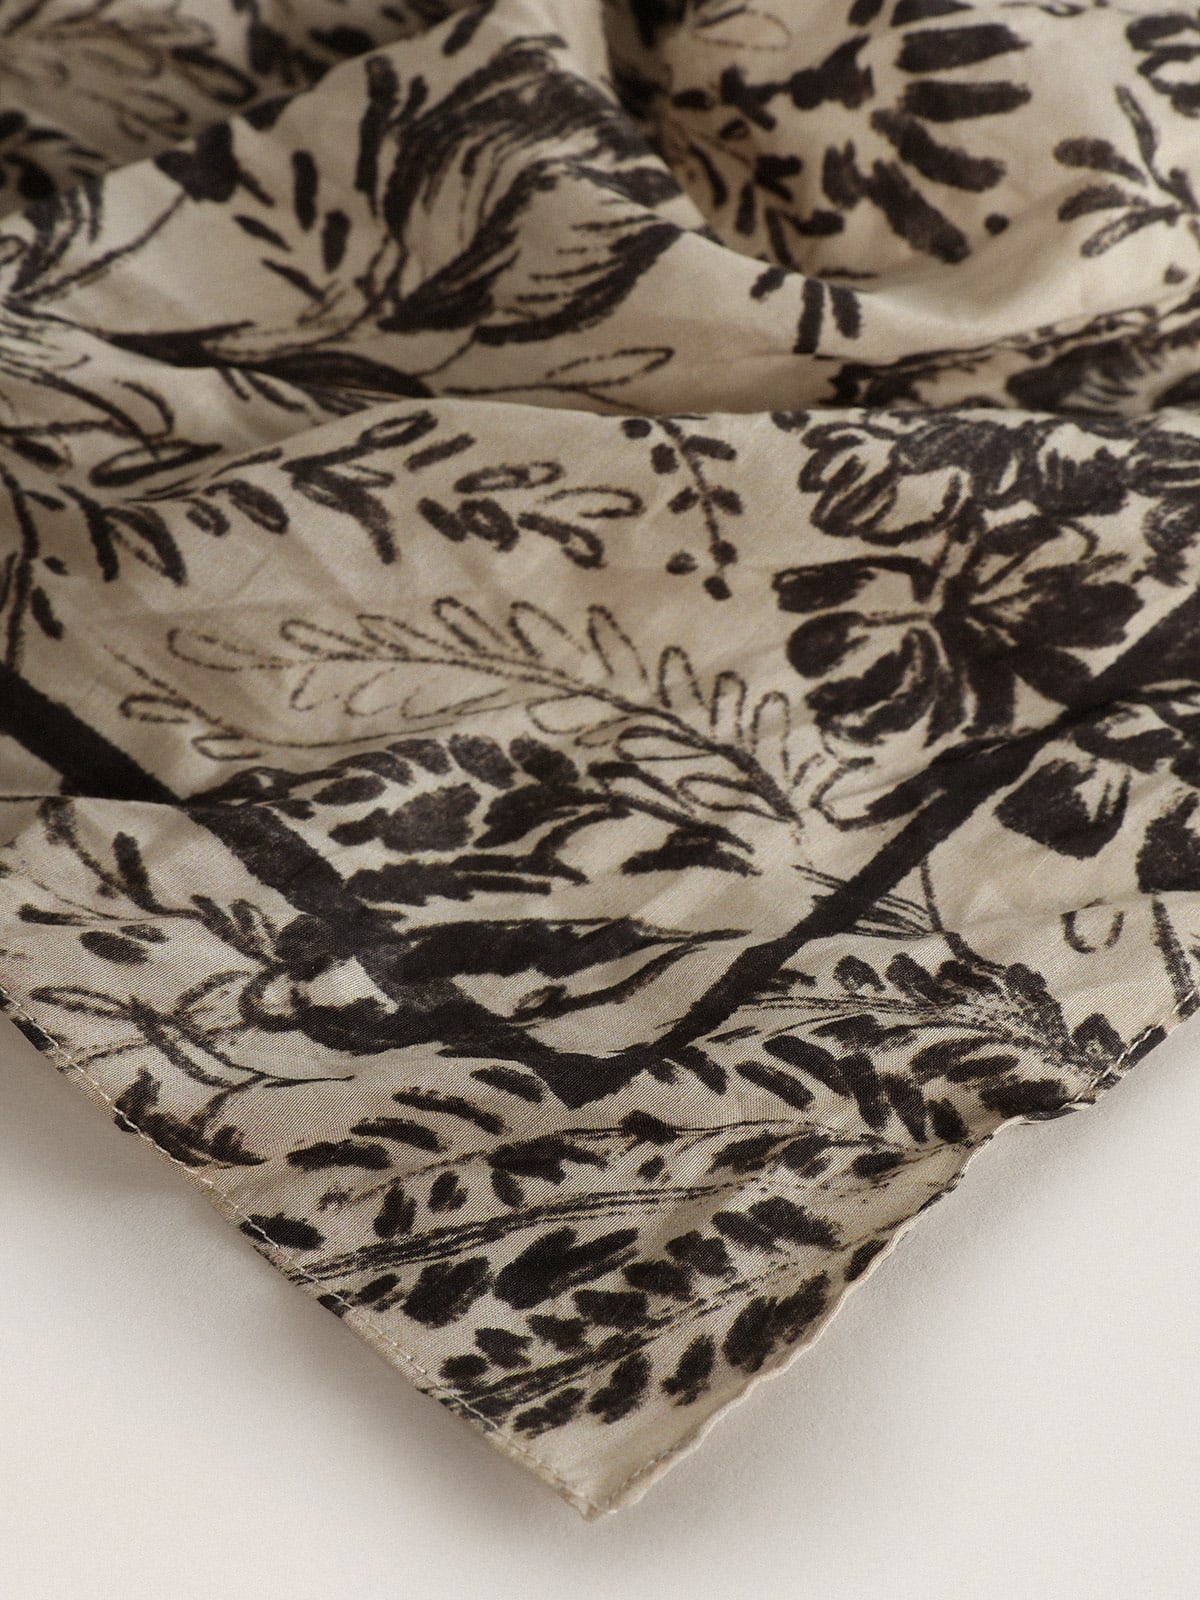 Bone-white scarf with contrasting toile de jouy pattern - 2